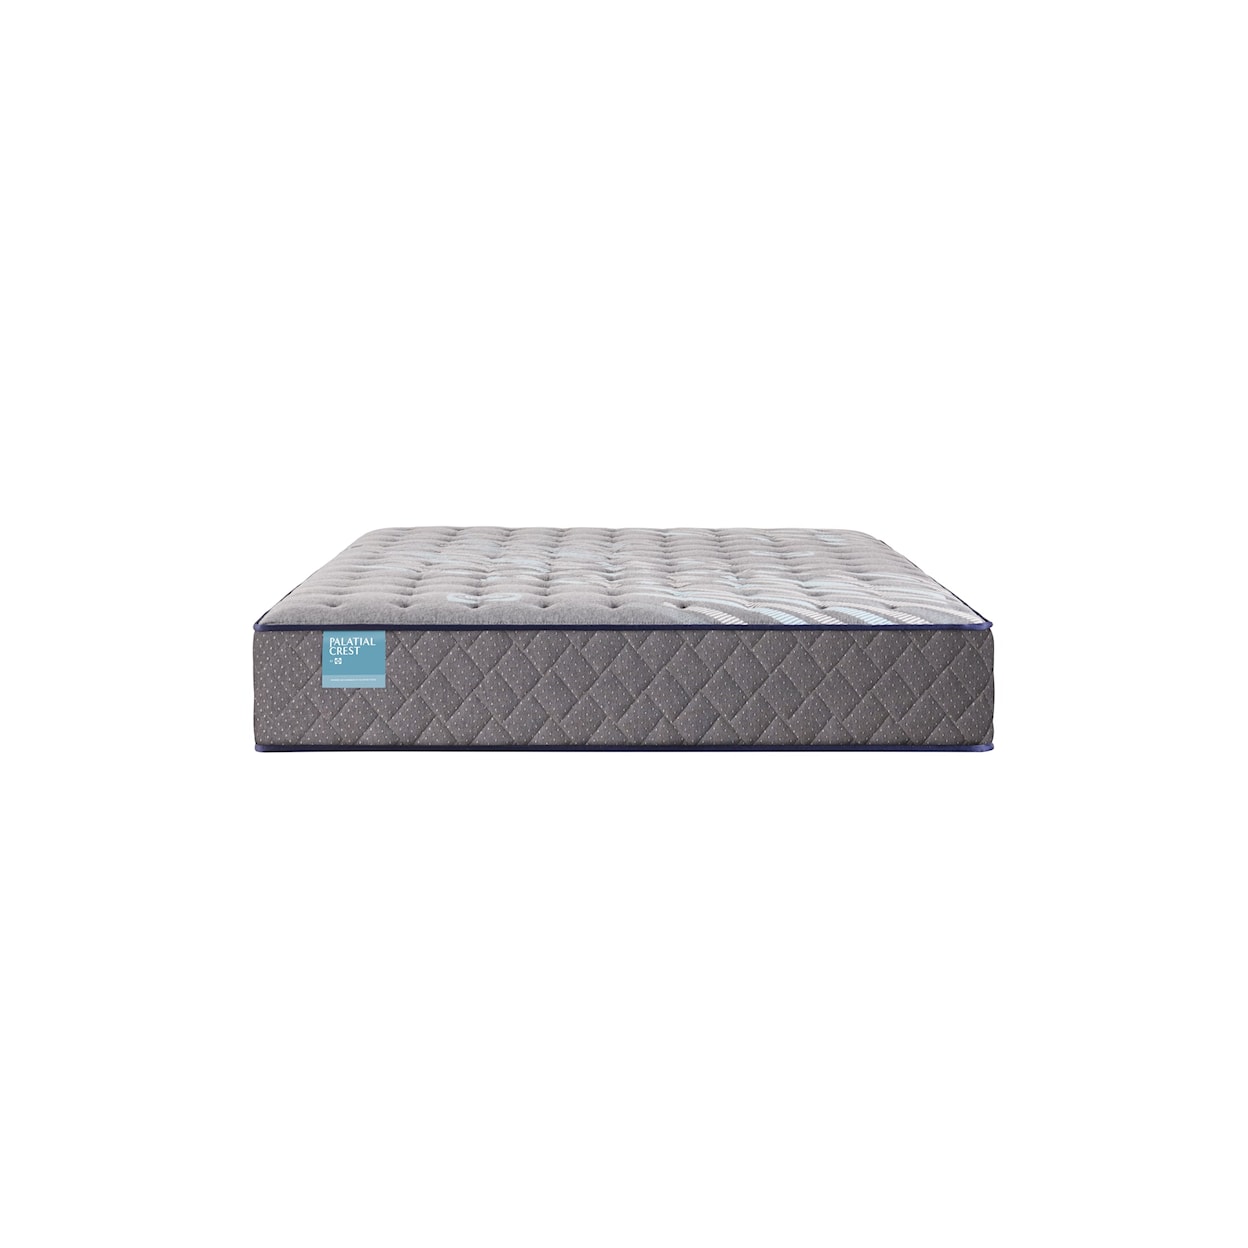 Sealy Palatial Crest S6 Cathedral Cove Soft TT Queen Mattress